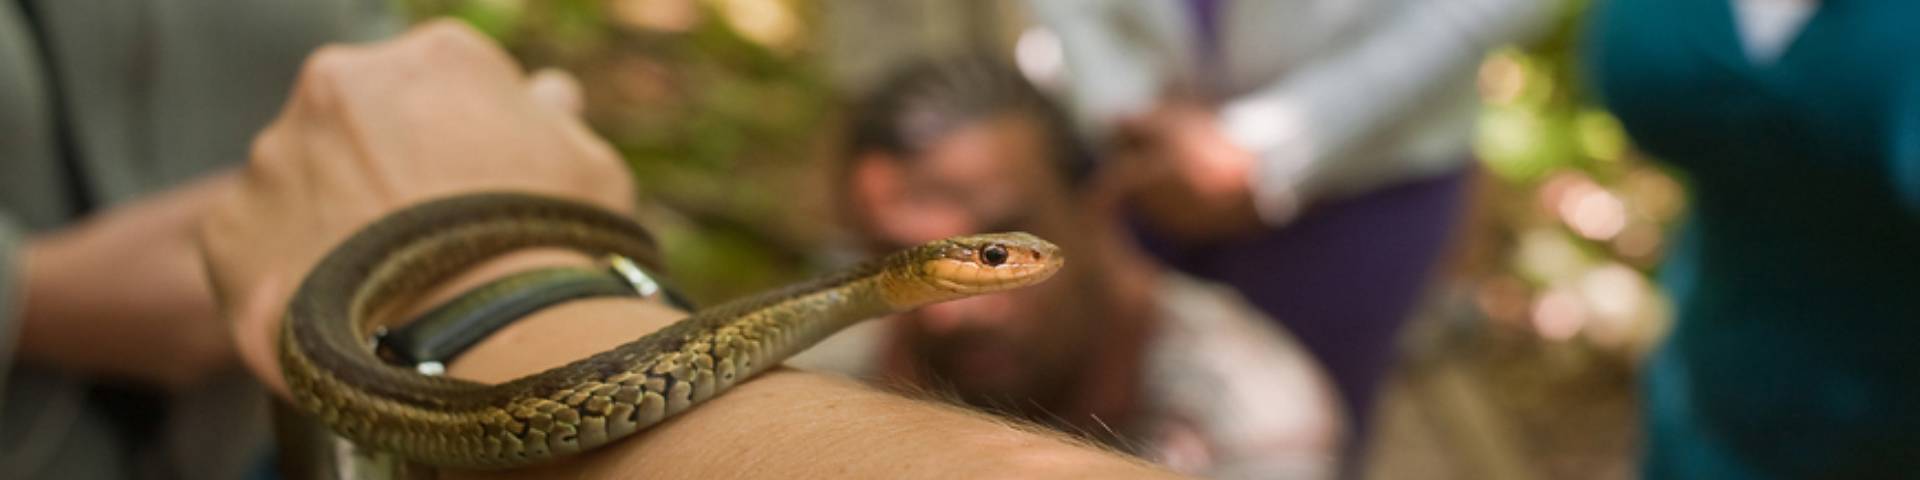 A small snake on a person's arm